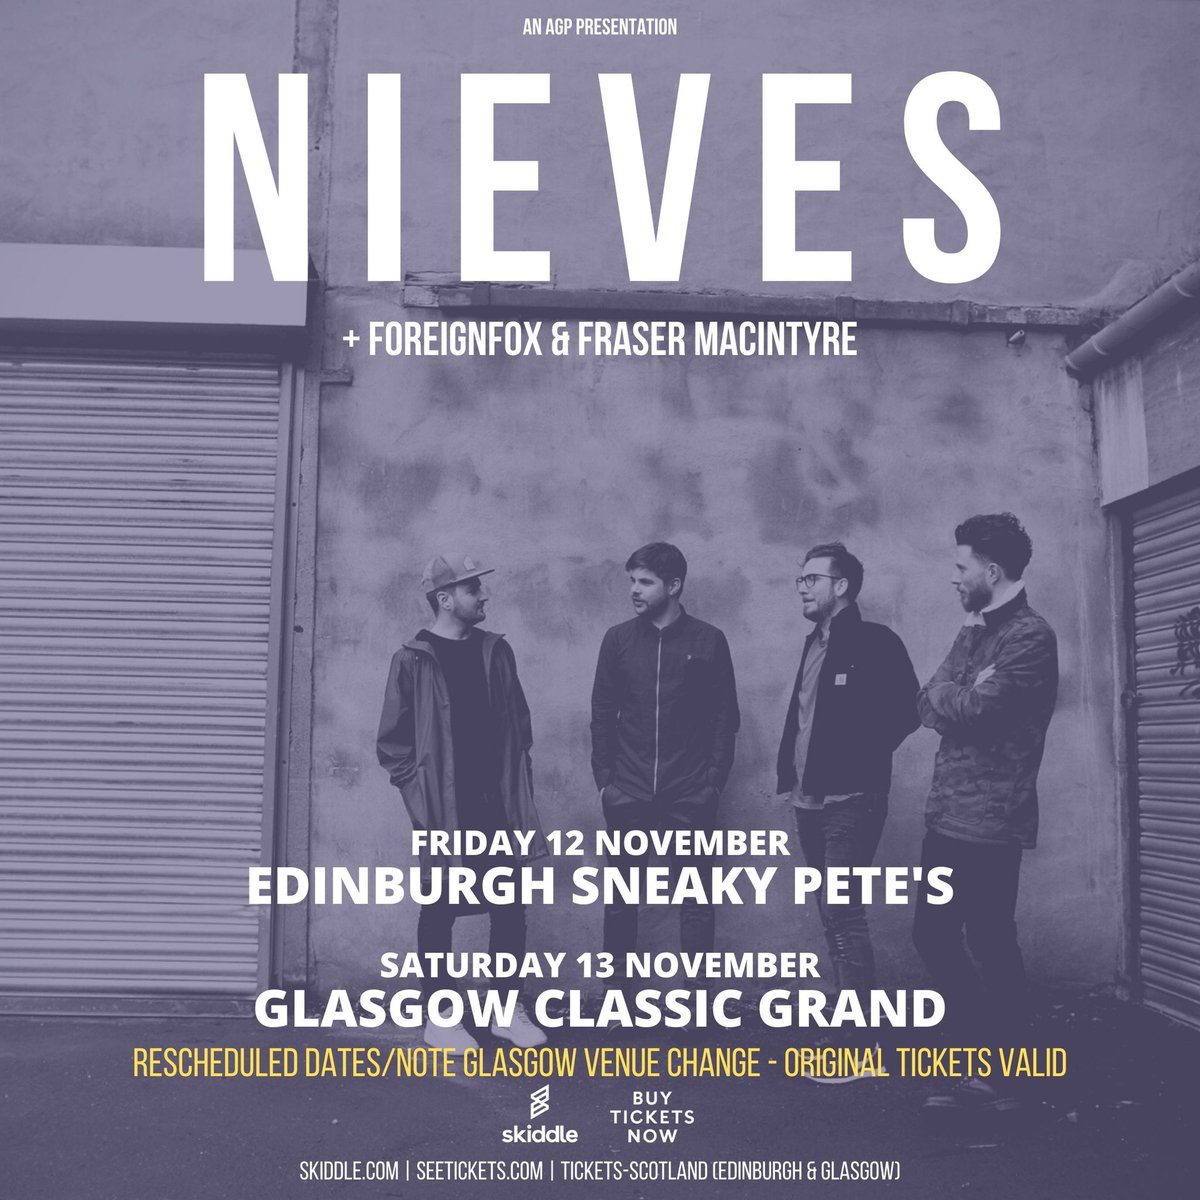 𝗢𝗡 𝗦𝗔𝗟𝗘 𝗡𝗢𝗪 @NievesGlasgow play 2 dates in November with both heading towards sell outs. Catch them with @ForeignFOXX & @fmacintyremusic on Fri 12 Nov | EDINBURGH @sneakypetesclub ➡️ skiddle.com/e/35782722 Sat 13 Nov | GLASGOW @Classic_G ➡️ skiddle.com/e/35782724